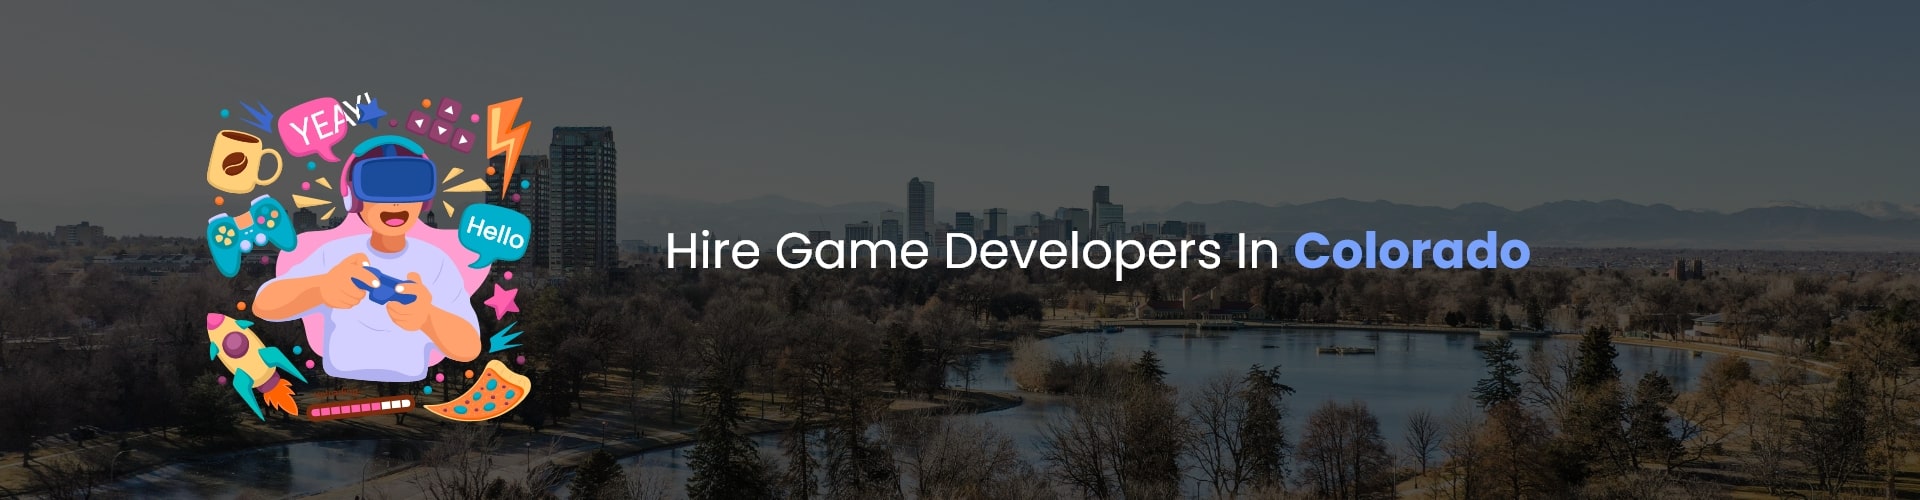 hire game developers in colorado